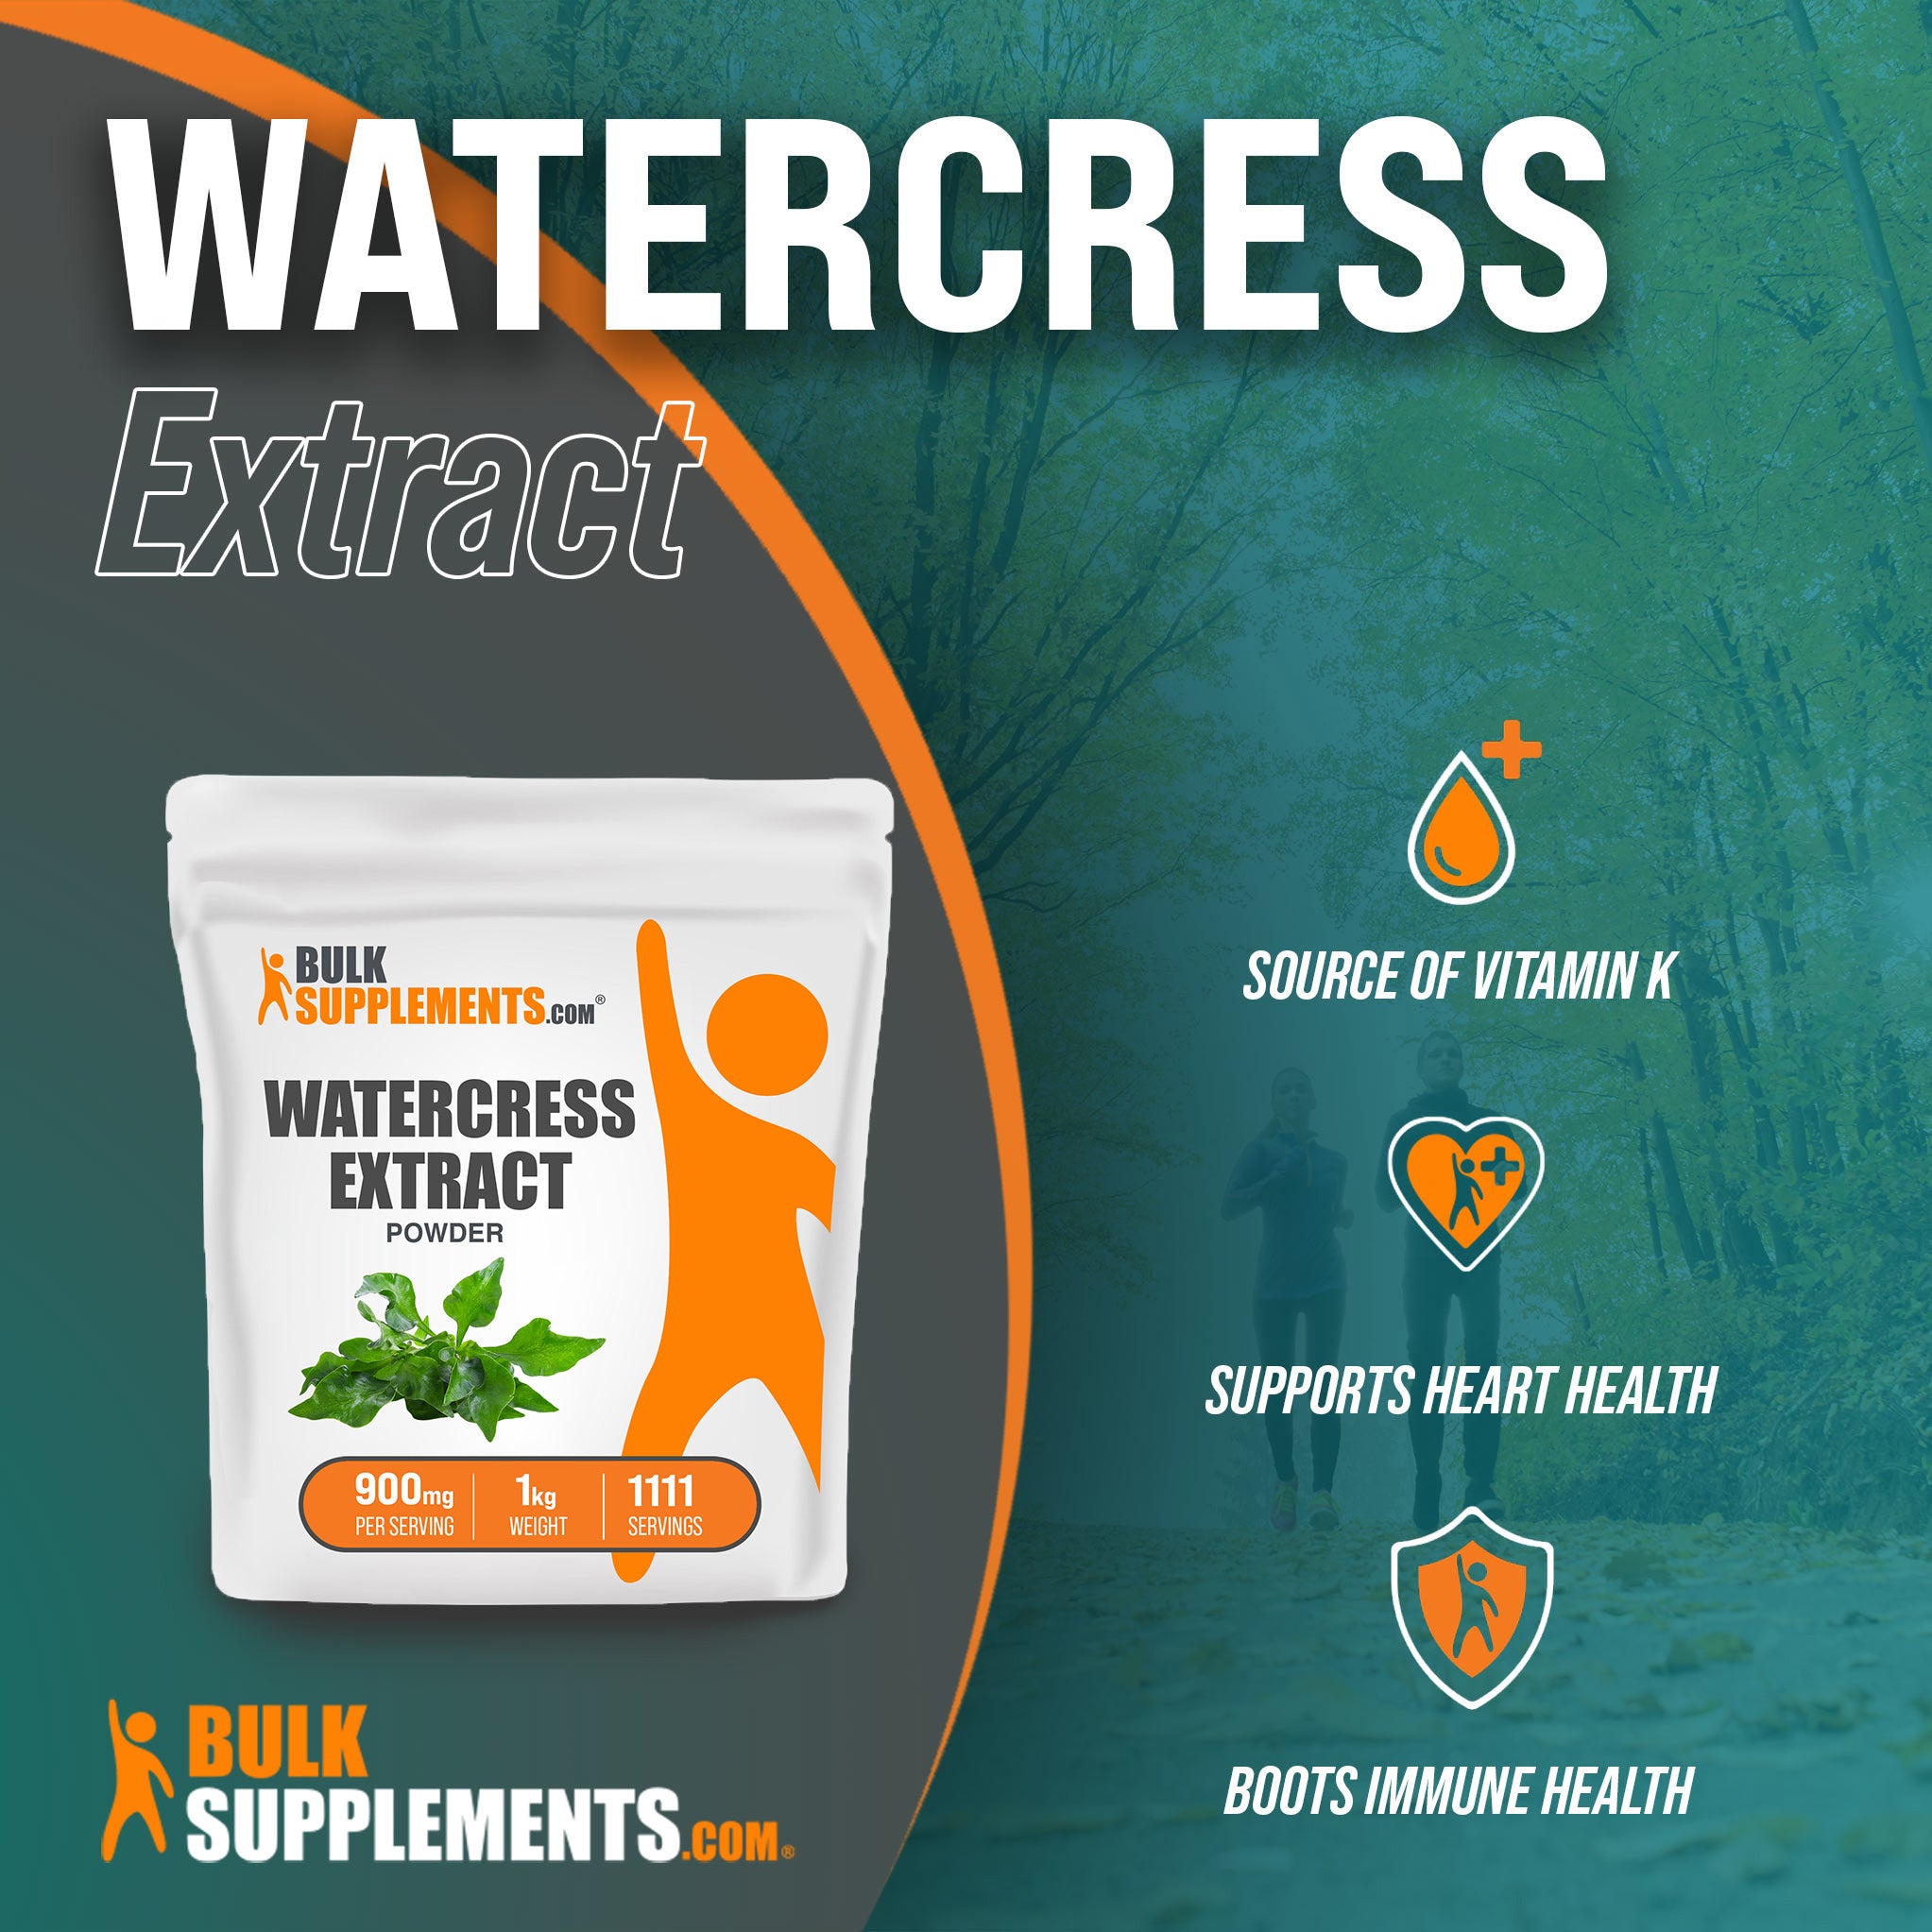 Benefits of Watercress Extract: source of vitamin K, supports heart health, boosts immune health